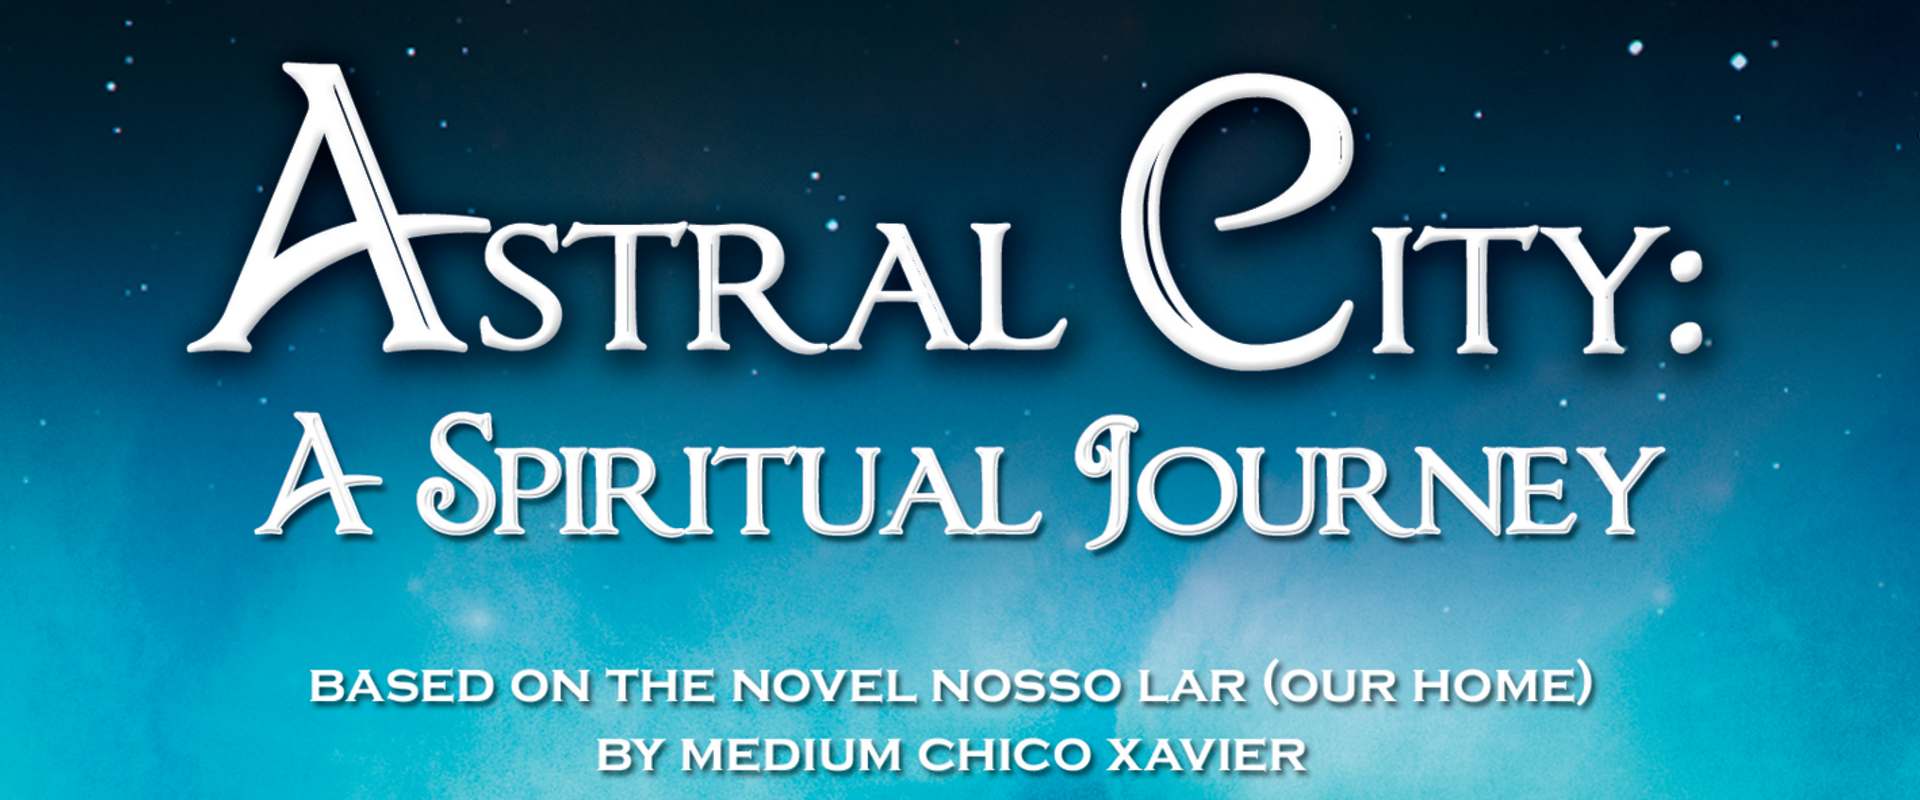 Astral City: A Spiritual Journey background 1